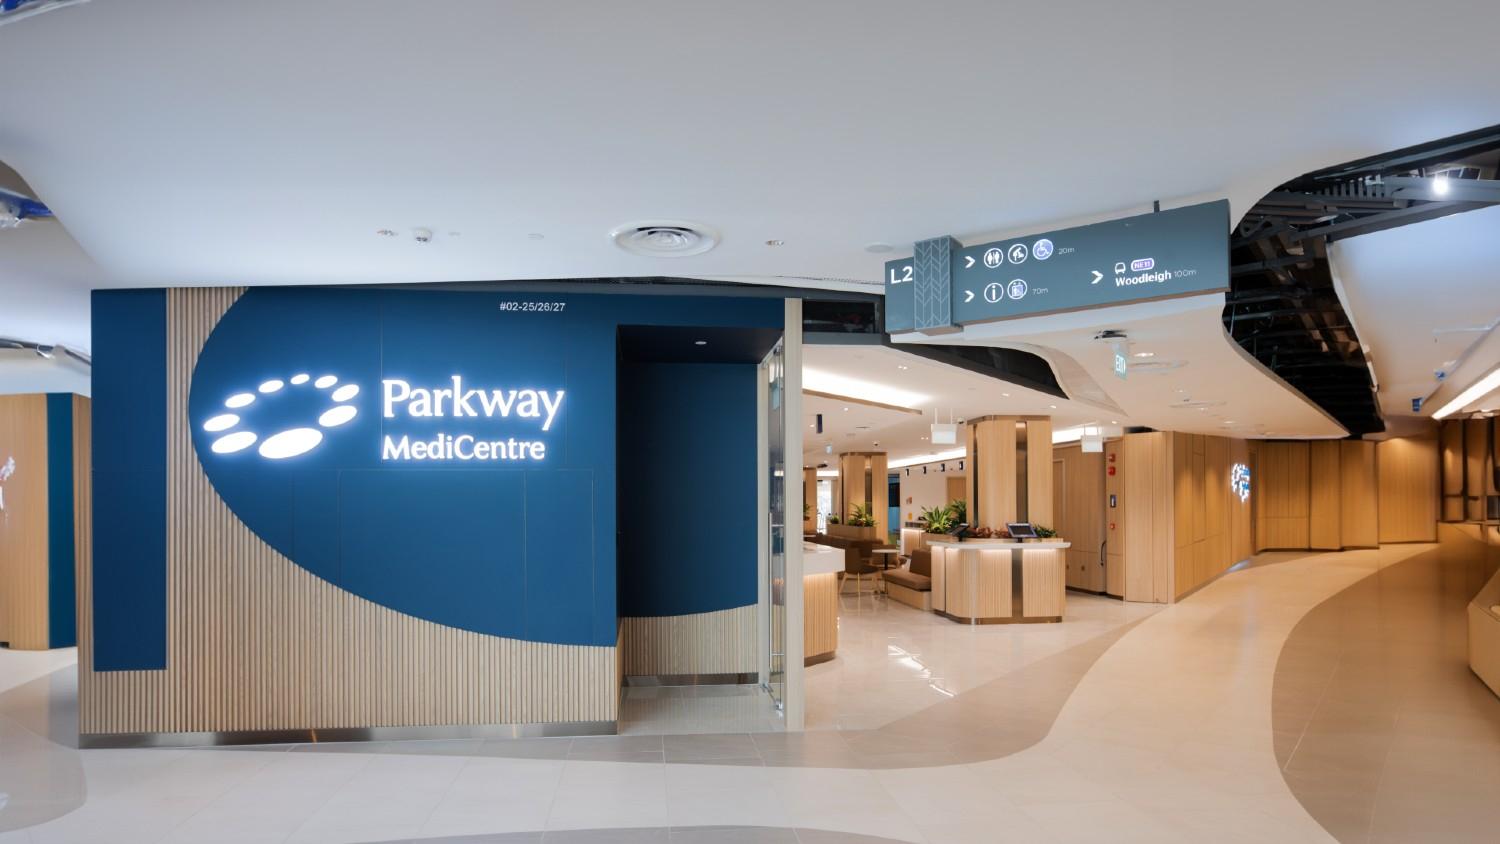 About Parkway MediCentre